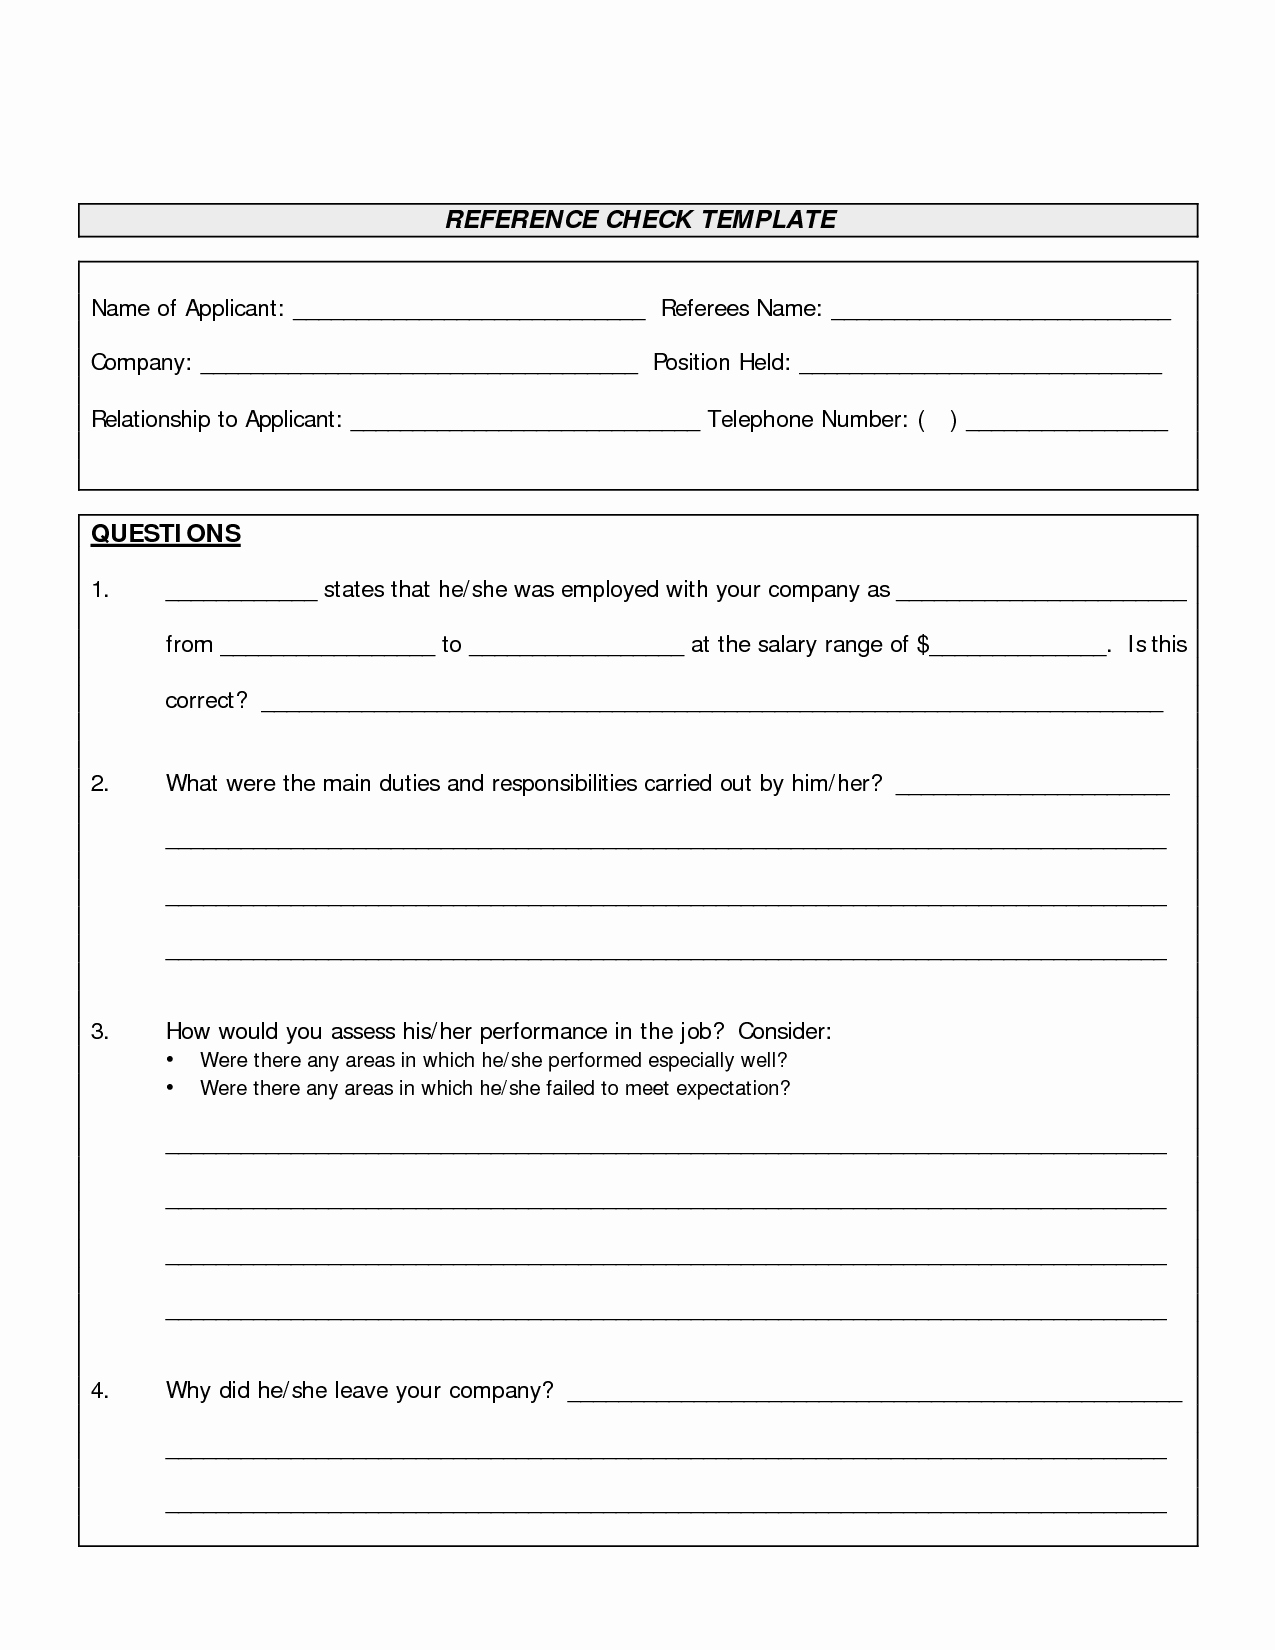 Reference Check form Template Inspirational Best S Of Employment Verification Questions